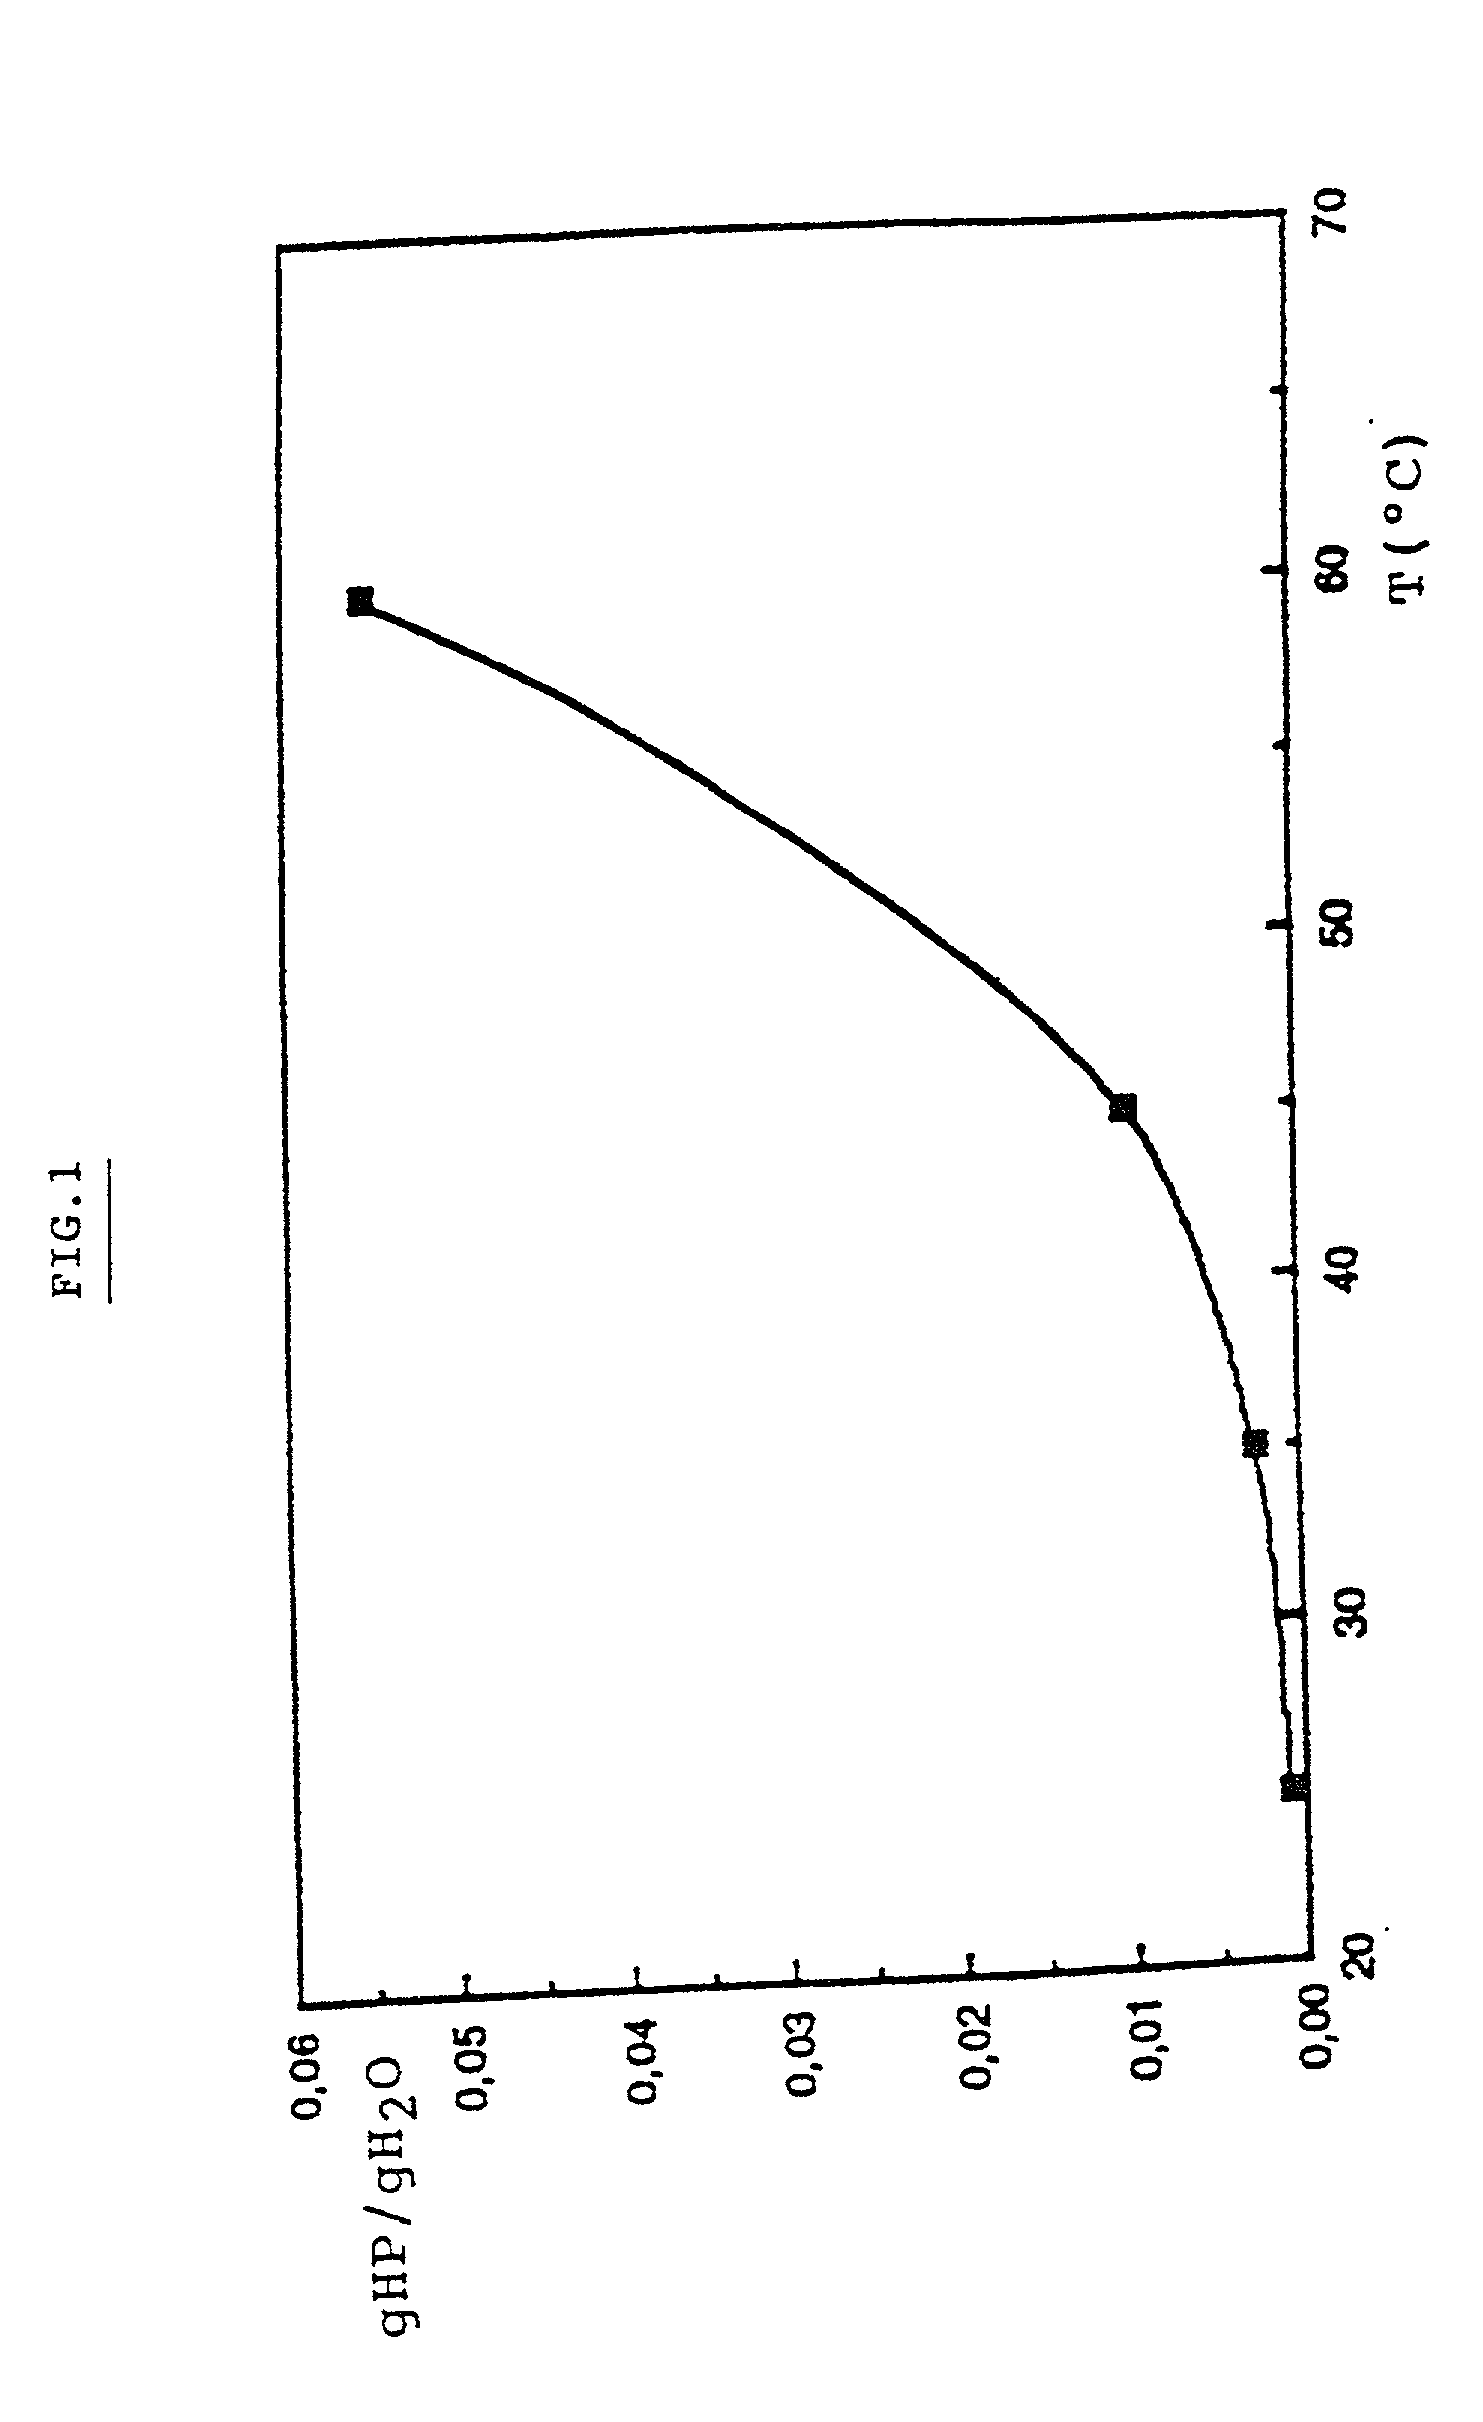 Fractionated polydisperse compositions